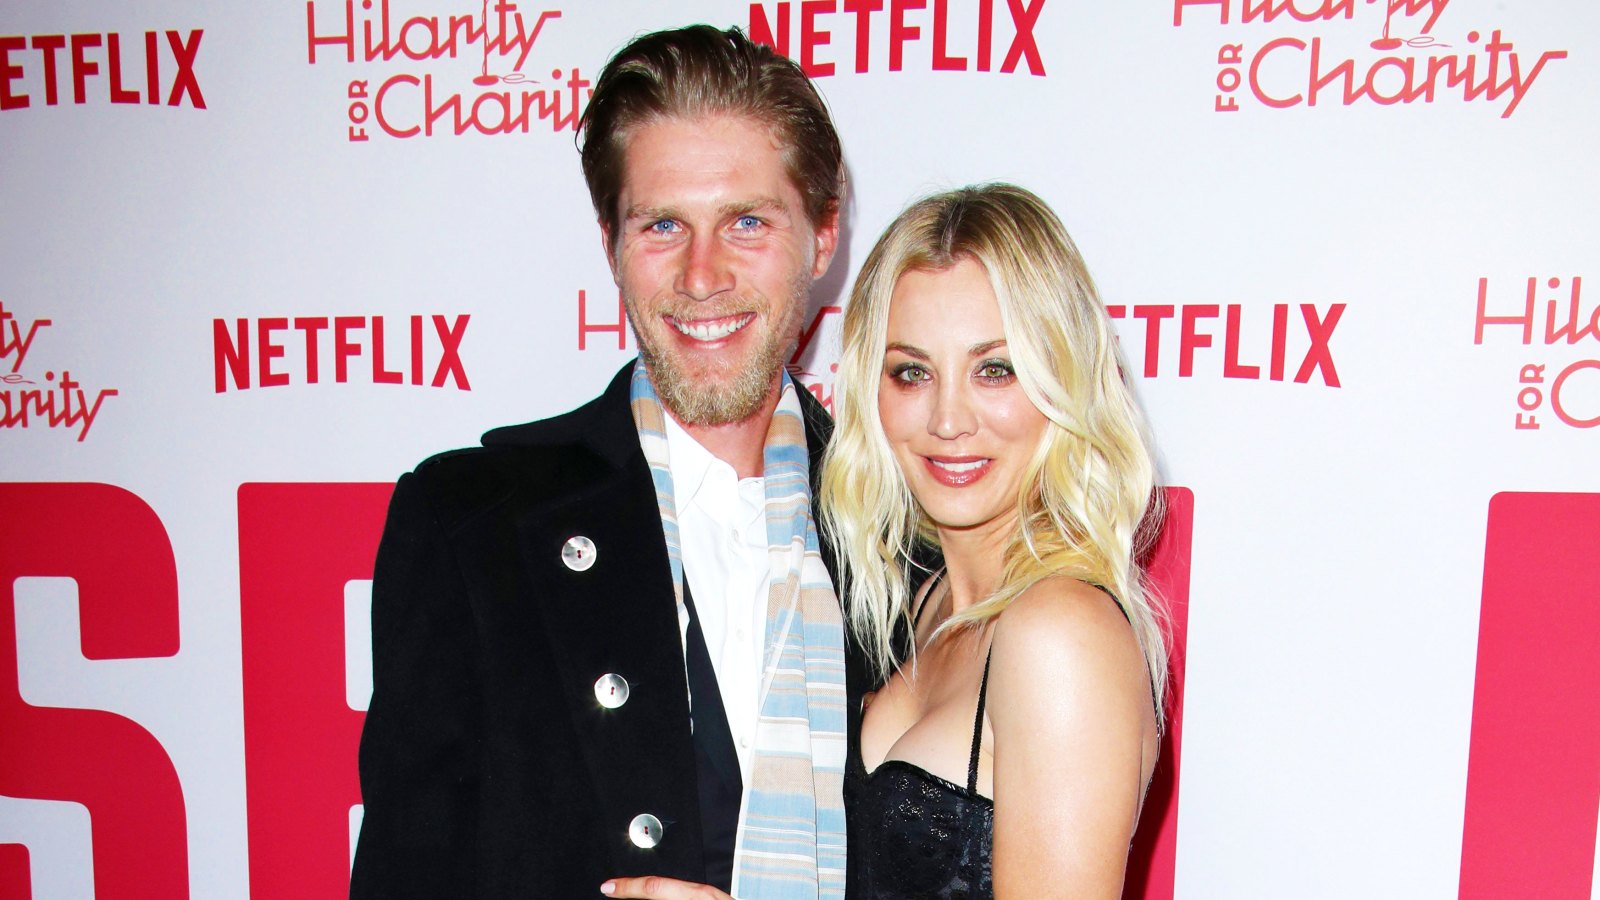 Kaley Cuoco Spanked by, Shares Kiss With Husband Karl Cook While Doing Koala Challenge